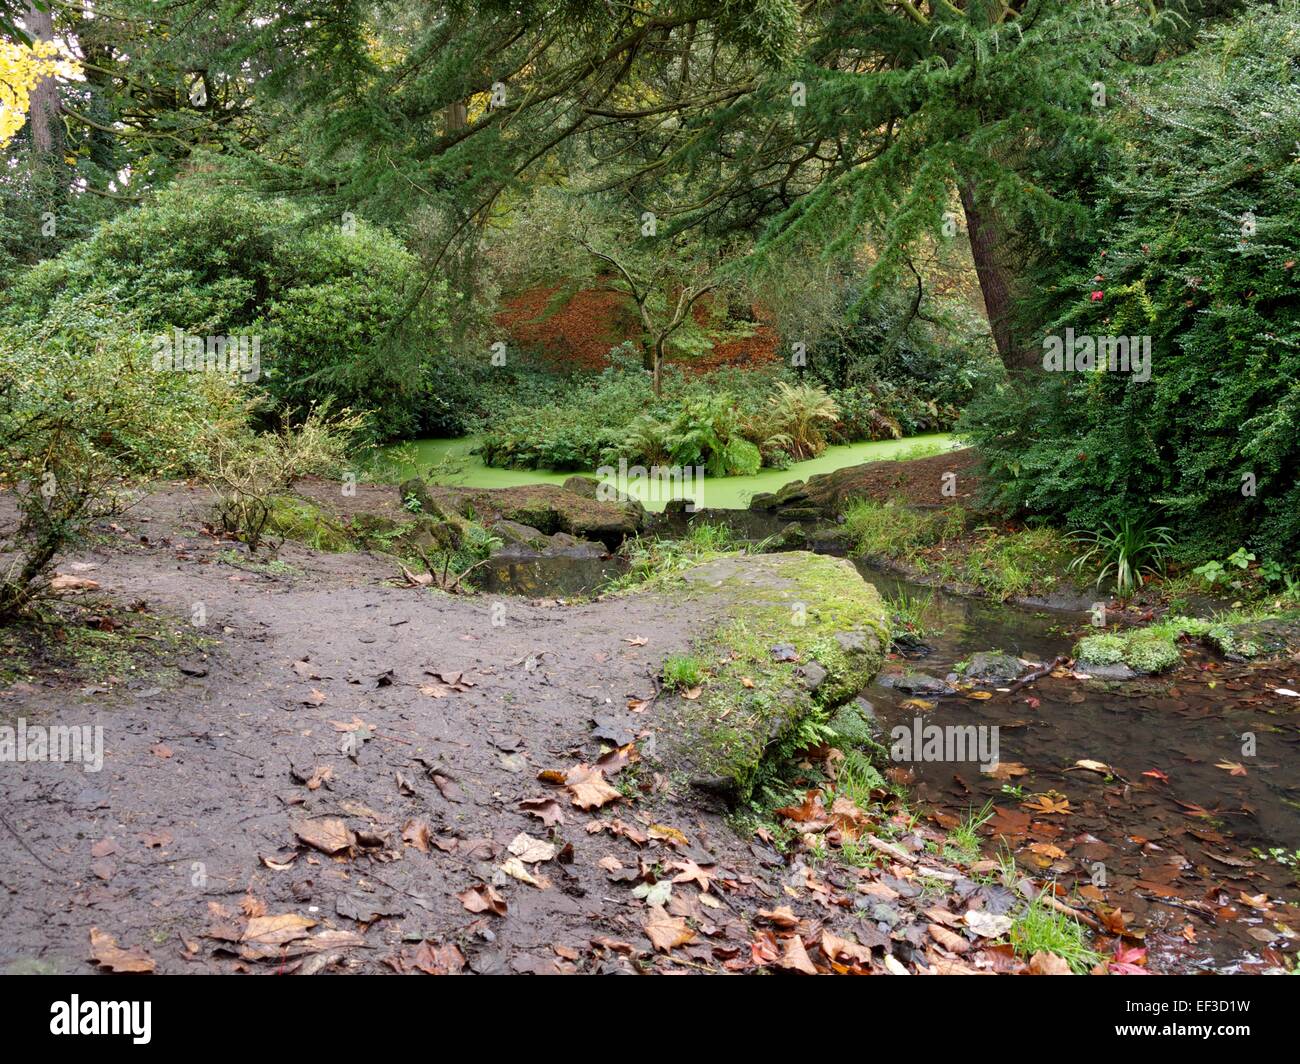 Stream flowing into Green moss covered water Stock Photo